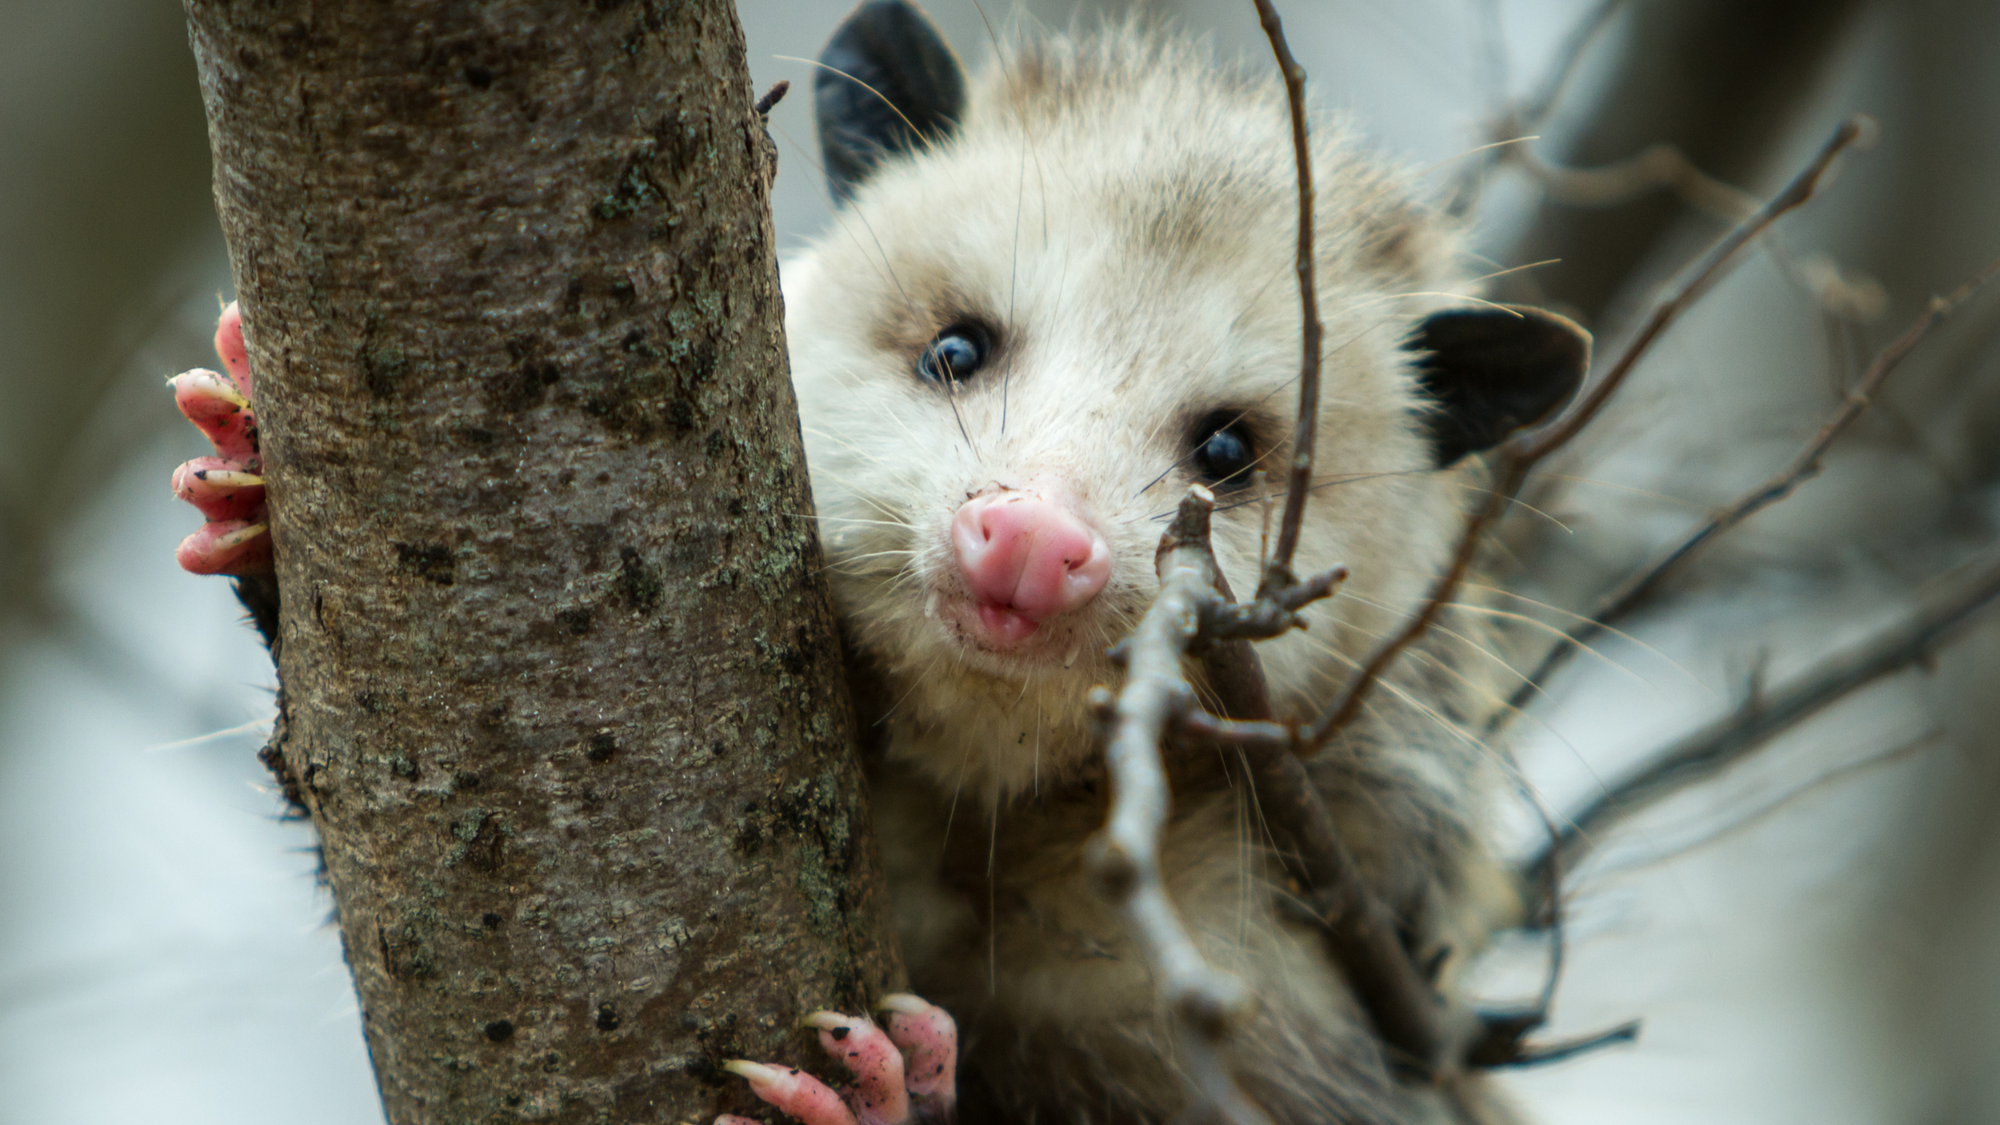 A gentle opossum clinging to a tree, looking into the camera with curiosity, debunking myths about opossums being dangerous.